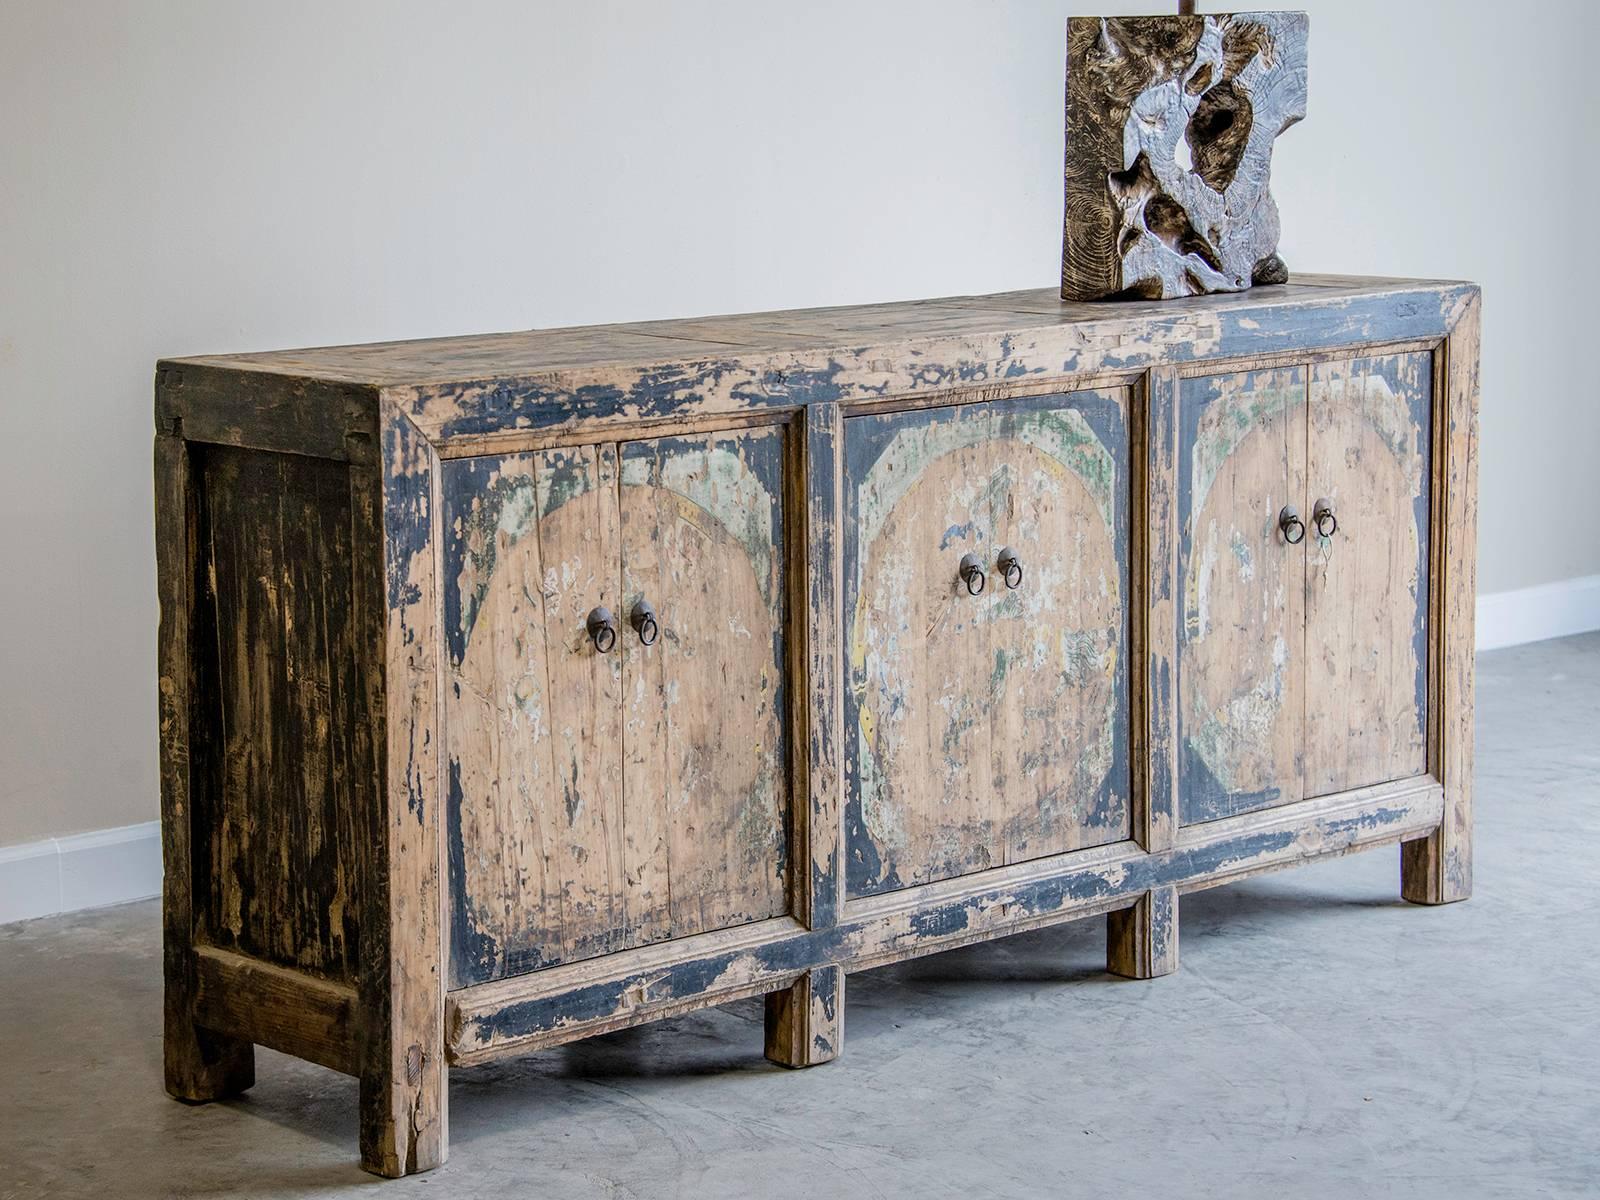 Receive our new selections direct from 1stdibs by email each week. Please click Follow Dealer below and see them first!

The handsome simplicity of this antique Chinese painted buffet circa 1875 gives it an air of ease as it will fit into a